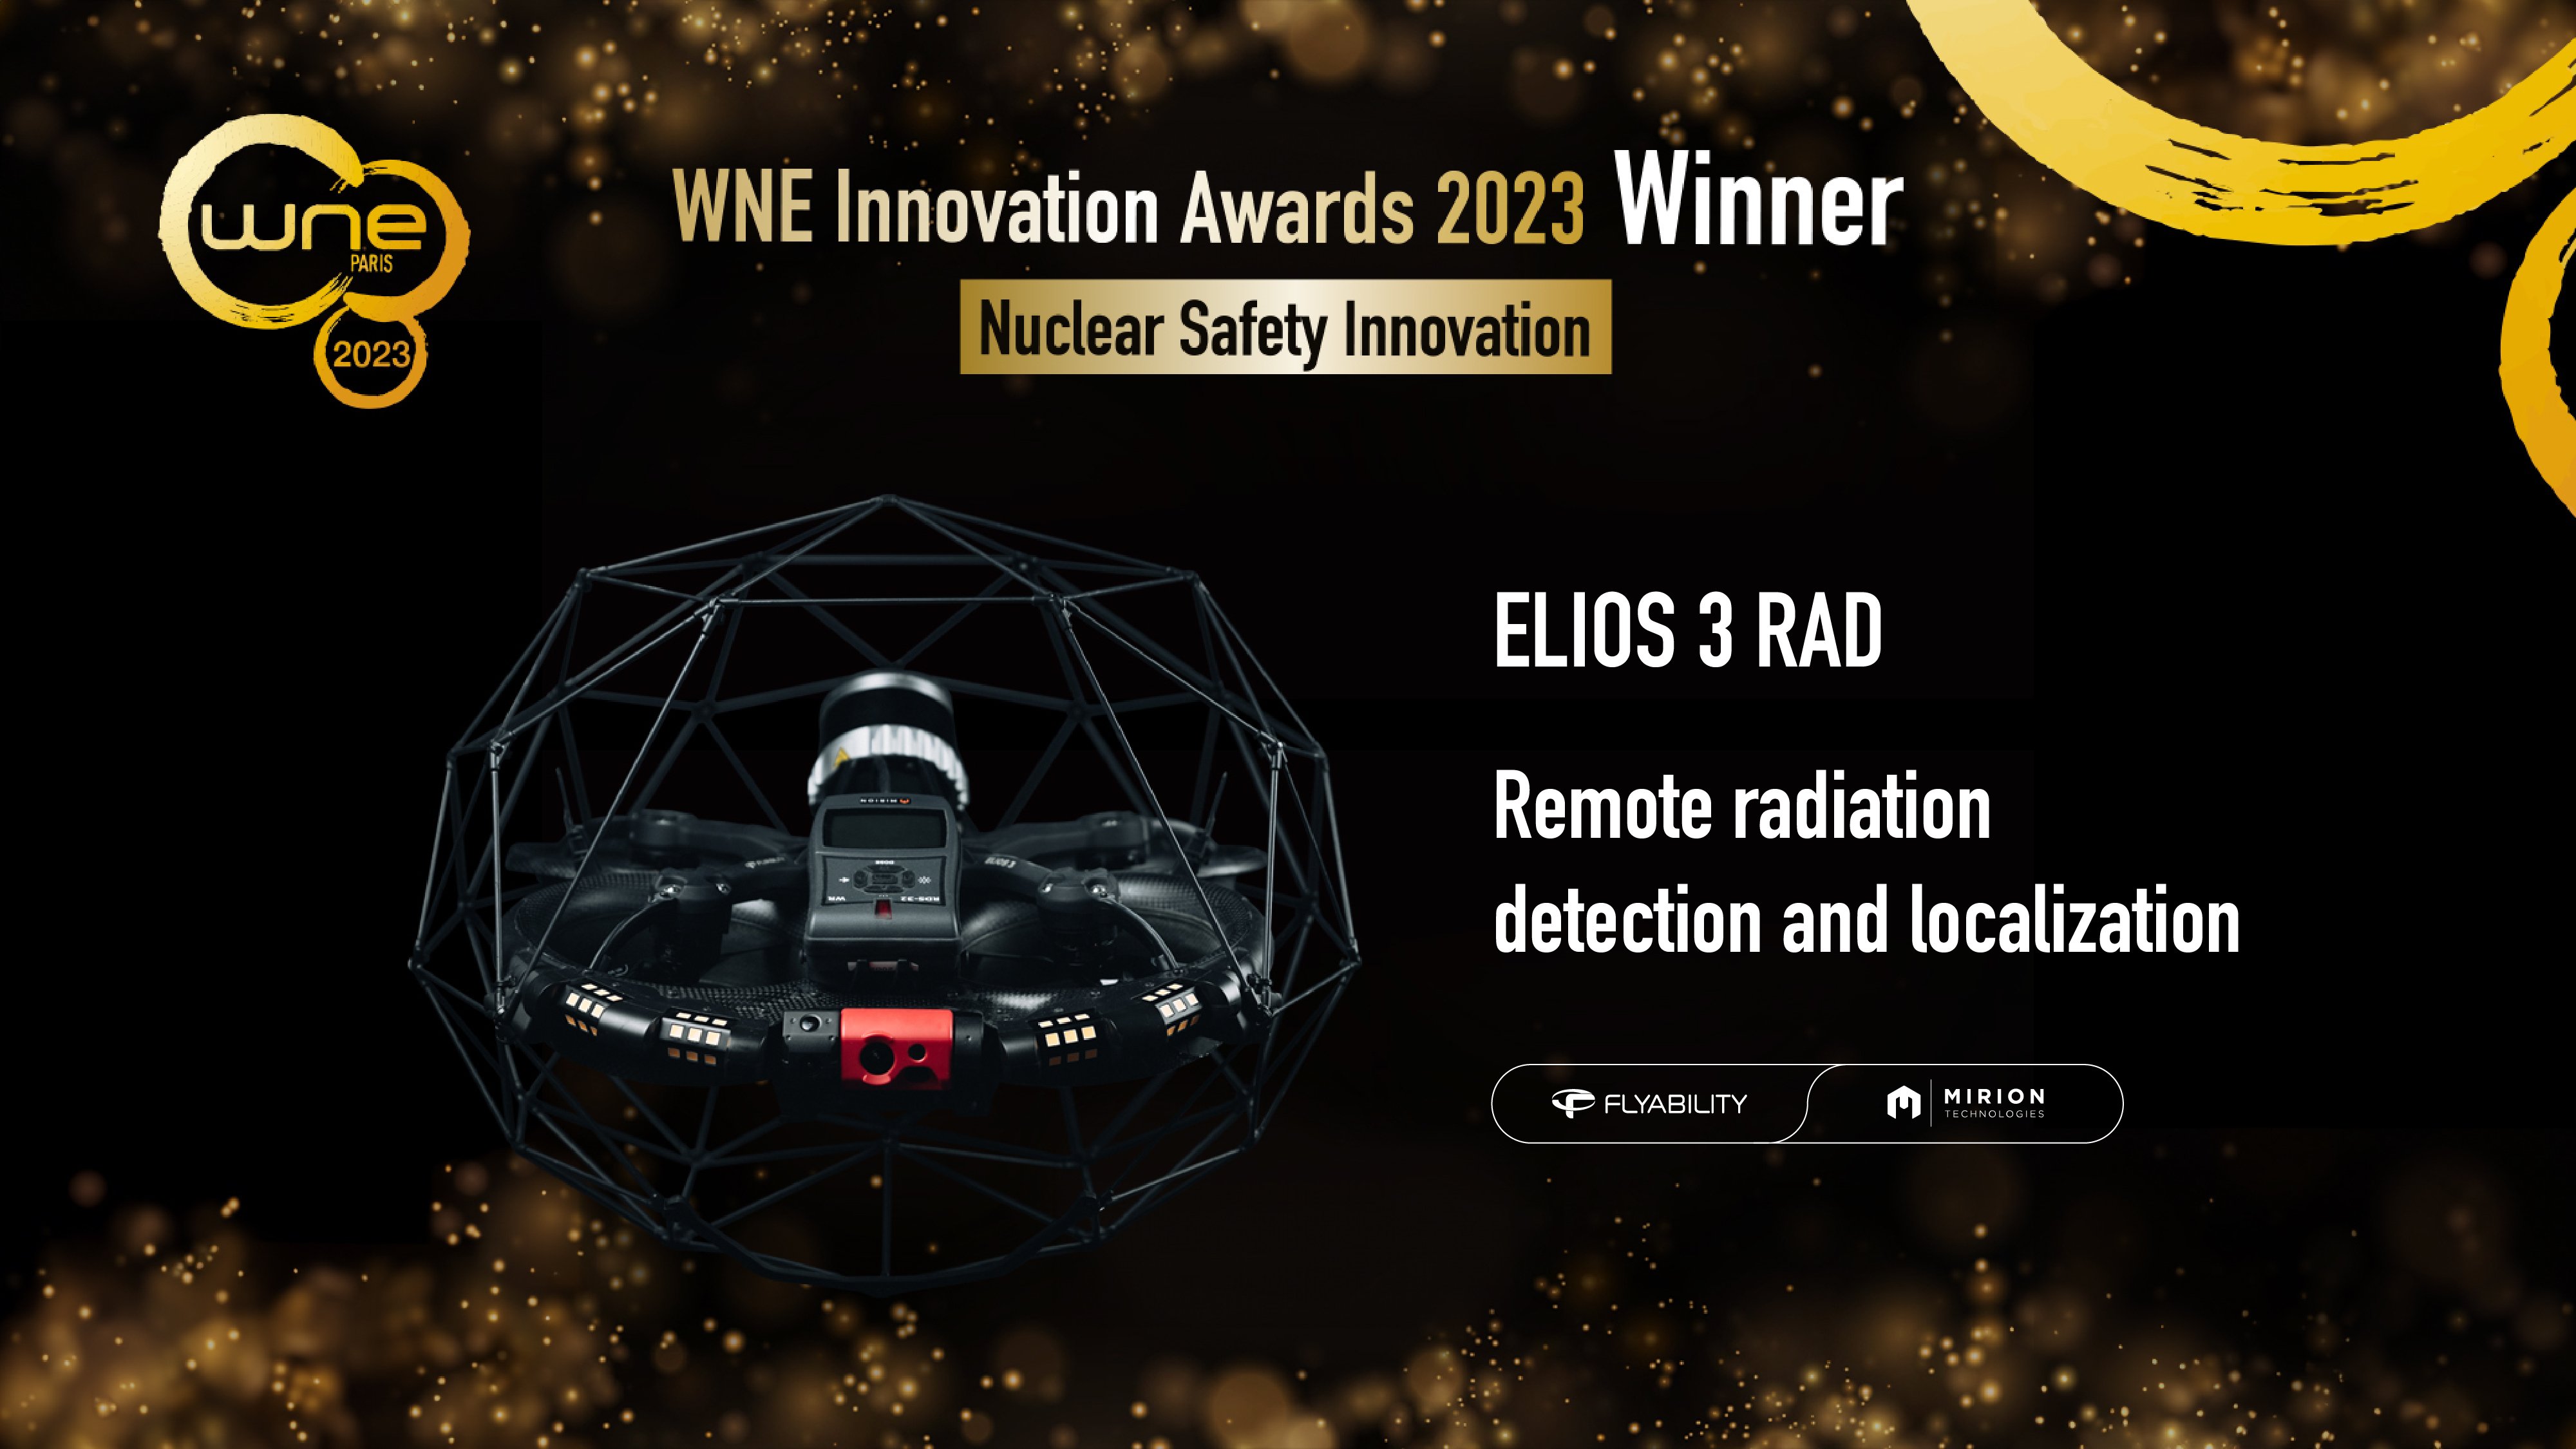 The Elios 3 RAD Wins Innovation Award at 2023 World Nuclear Exhibition